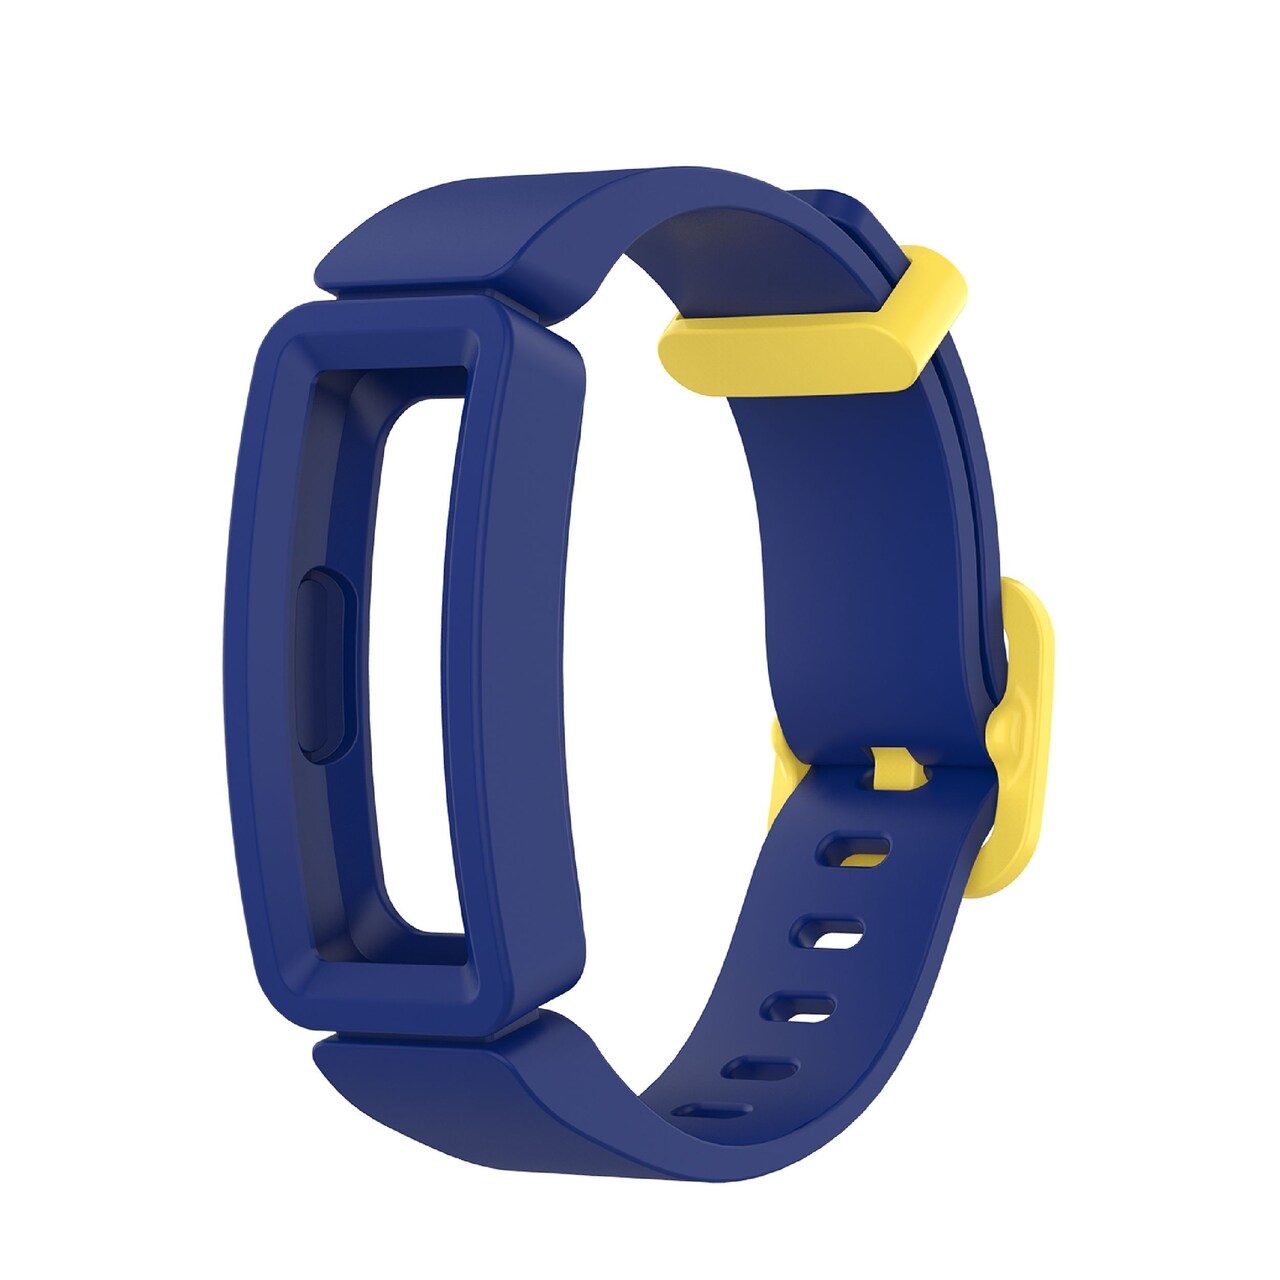 Compatible with Fitbit Inspire/Inspire HR/Inspire 2 and Ace 2